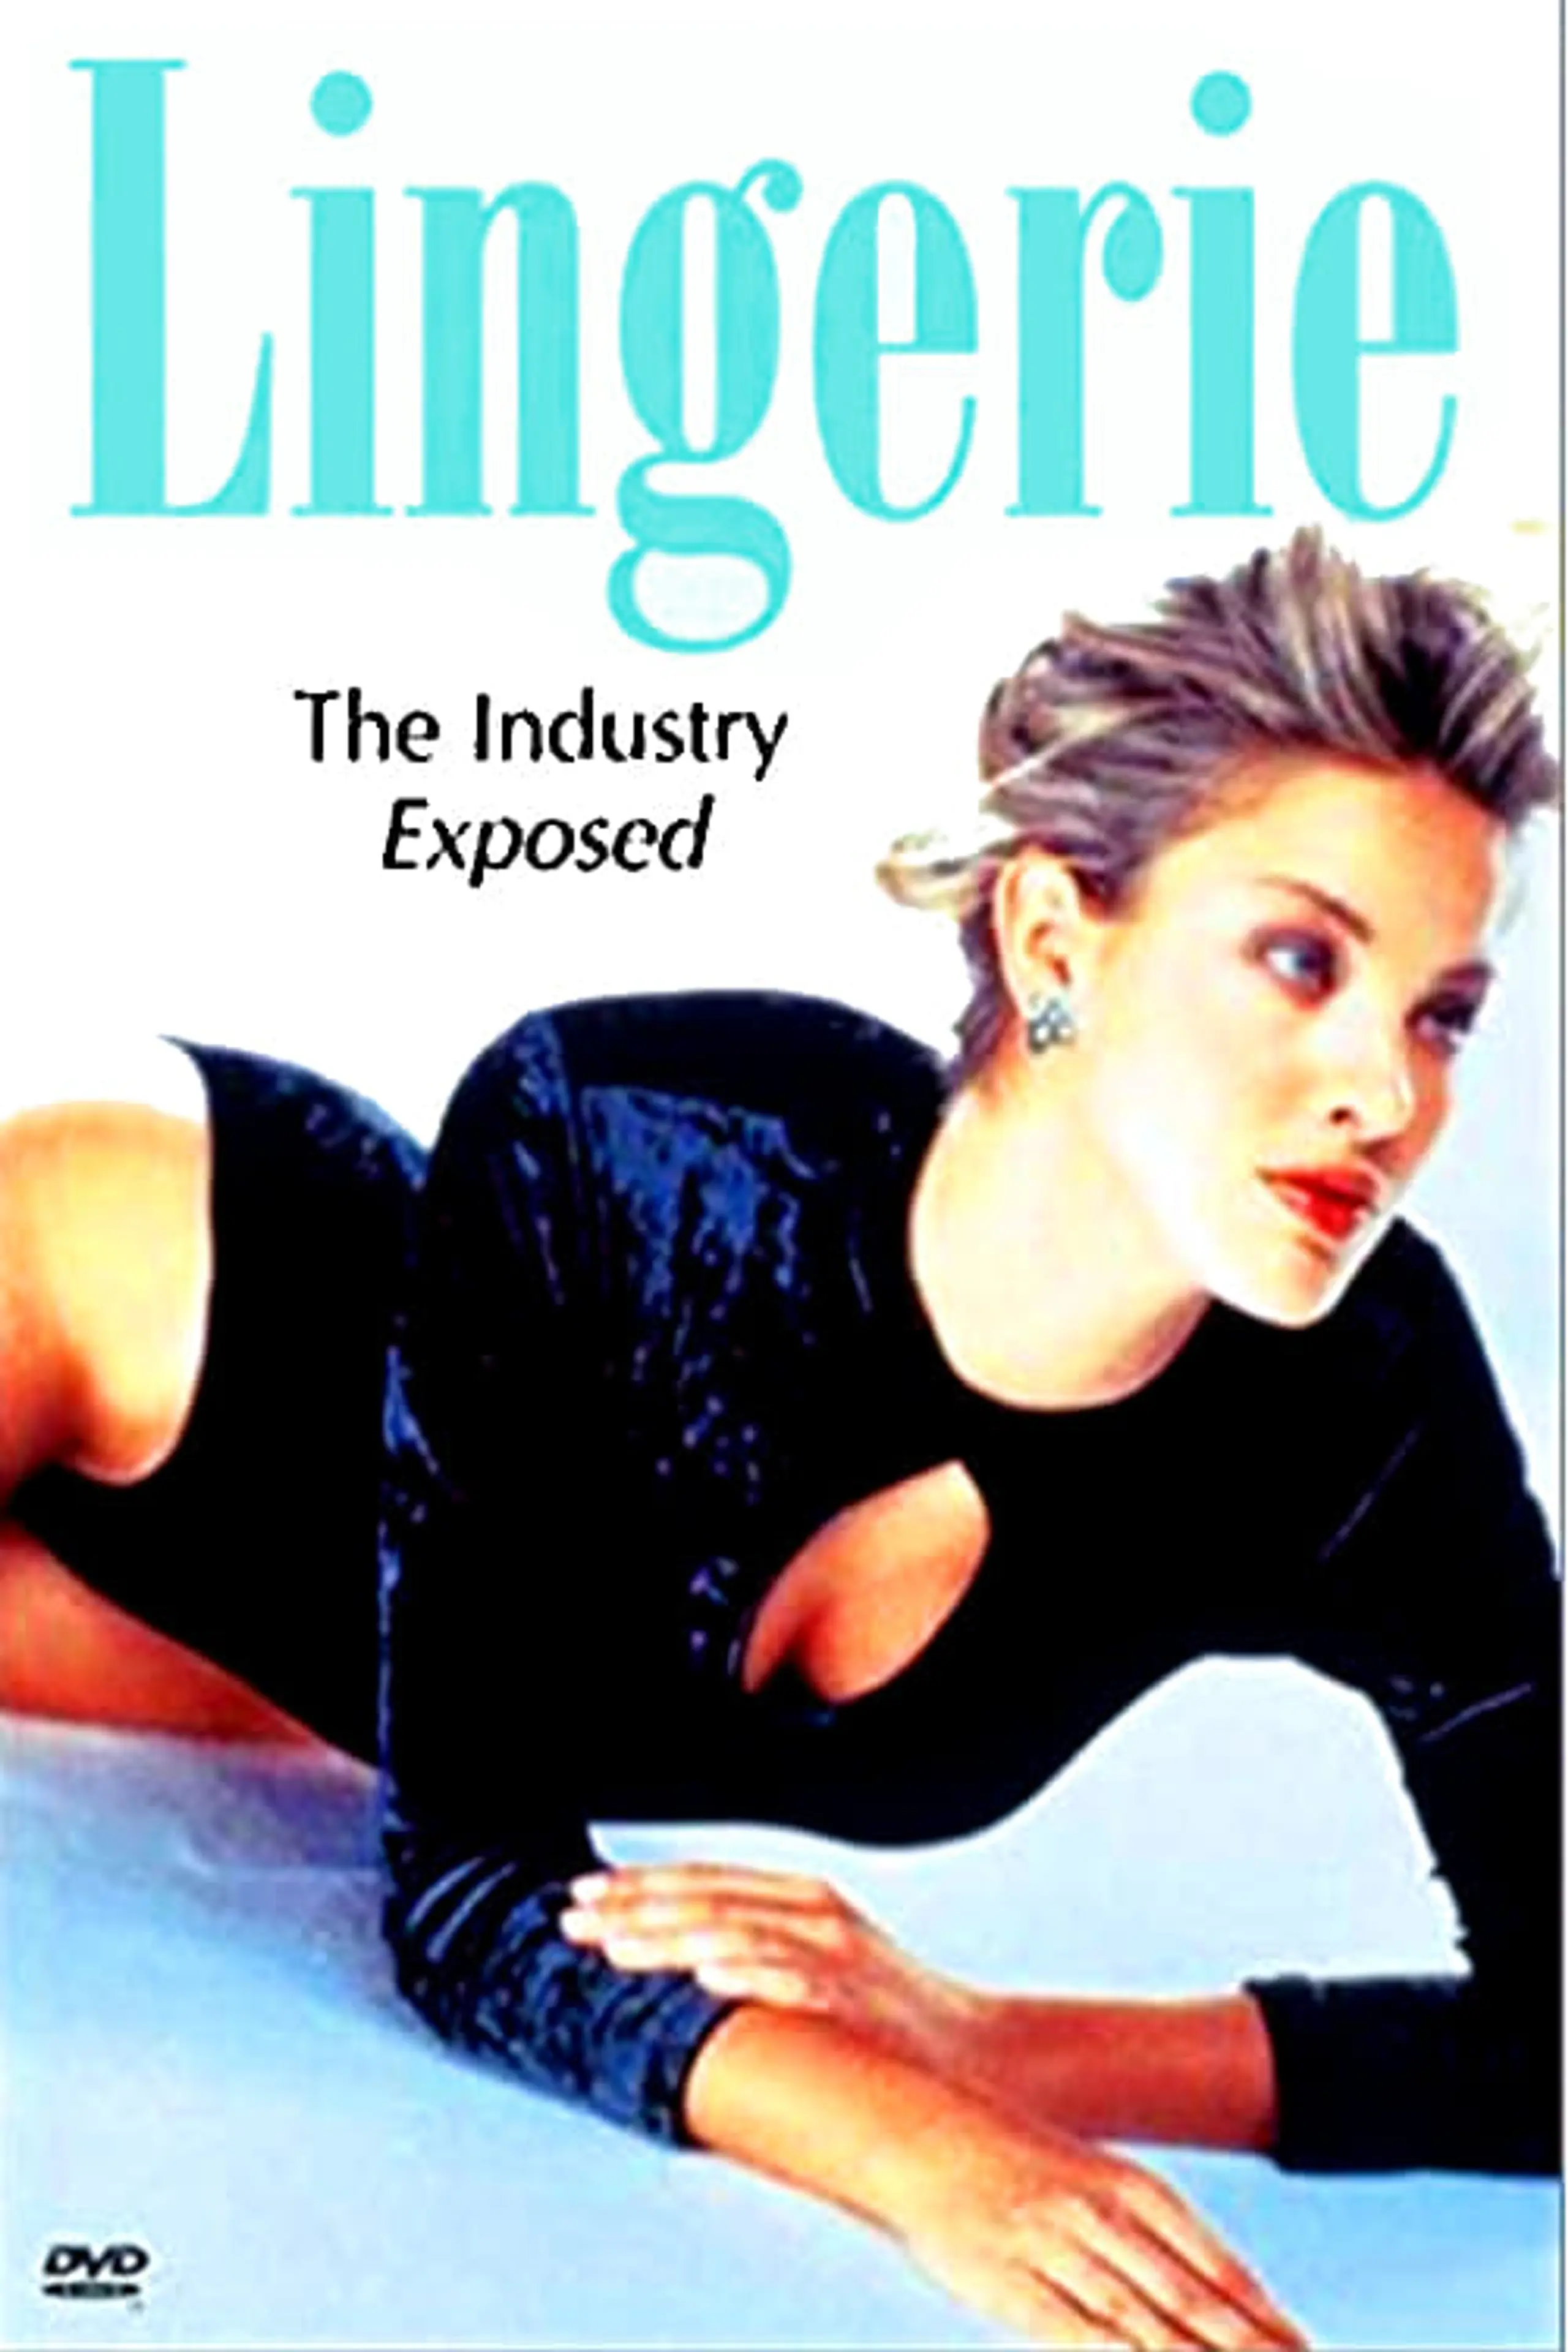 Lingerie - The Industry Exposed